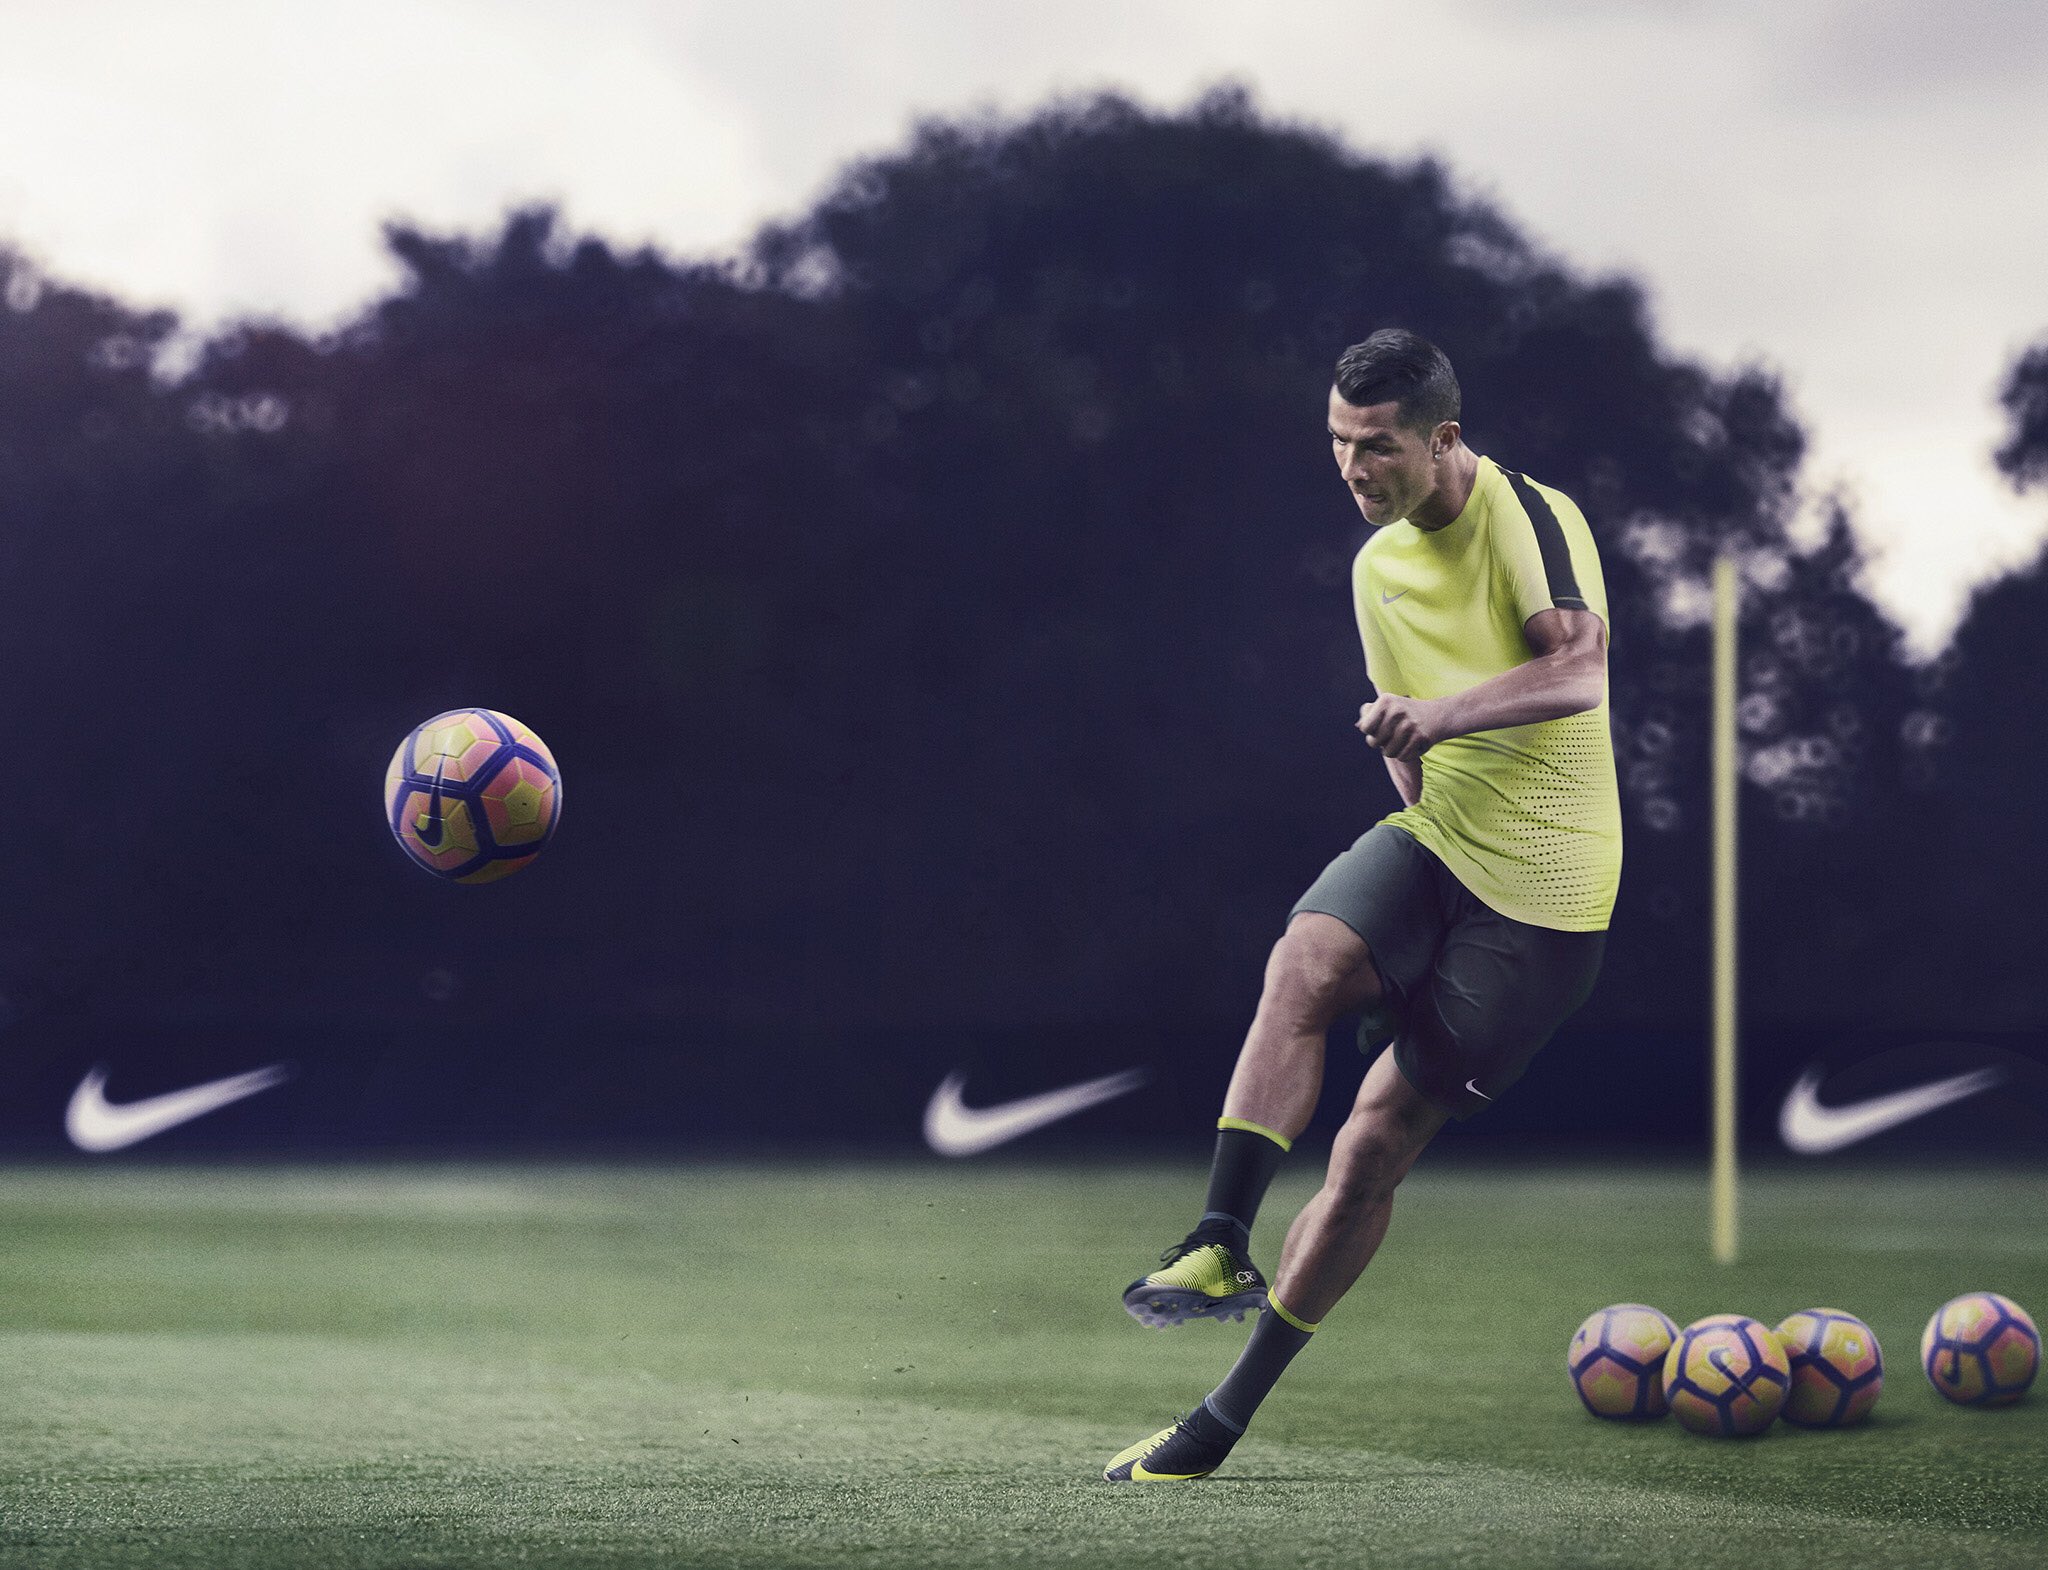 Thank you for your help action Event Cristiano Ronaldo on Twitter: "Target practice 🎯 #Mercurial CR7 Chapter 3,  lace up at https://t.co/E2zLOUFGP6 https://t.co/m9p4aDrltN" / Twitter